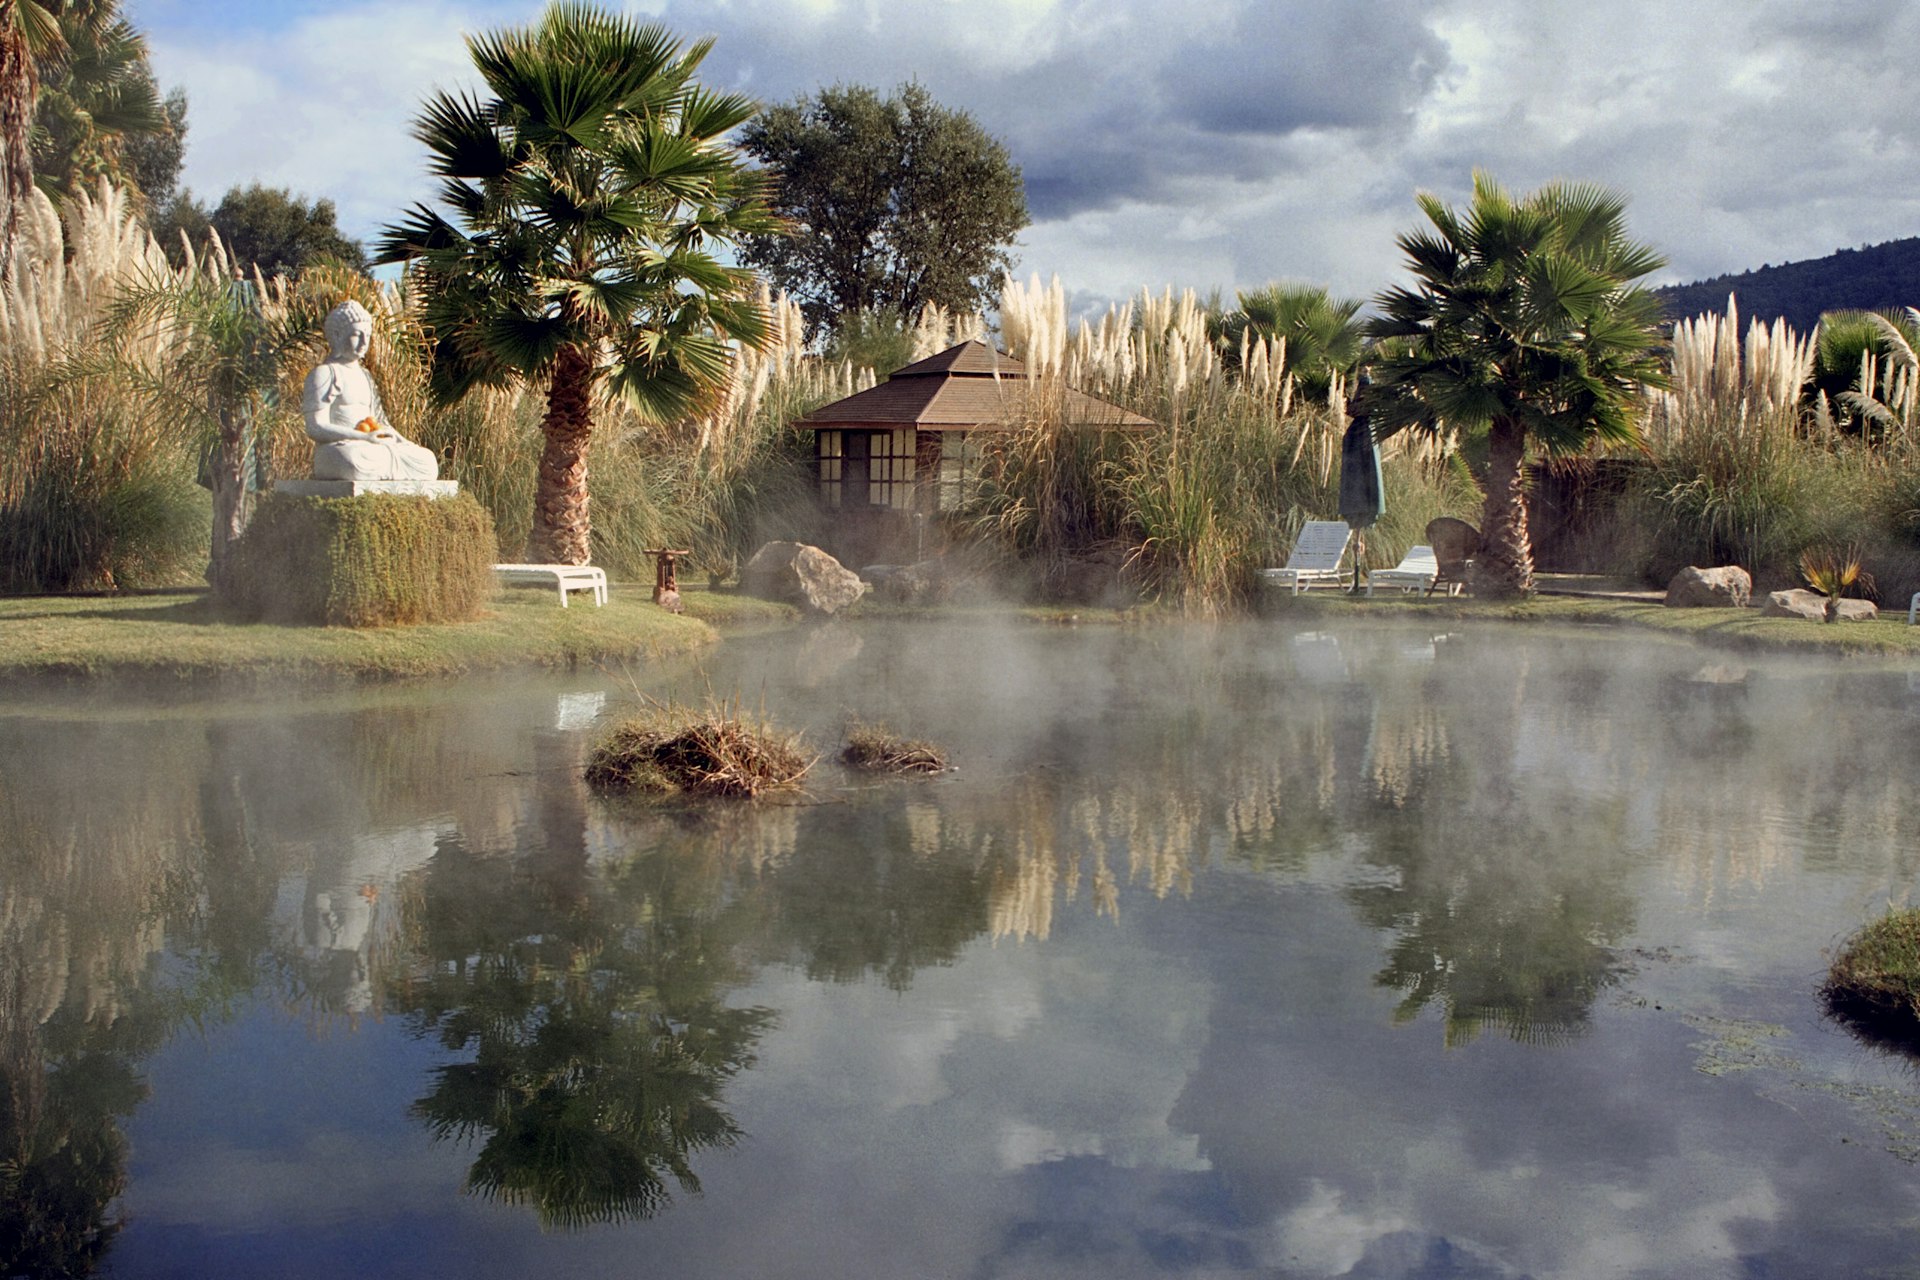 Steam rises off the thermal hot spring pool at Indian Springs in Calistoga, California